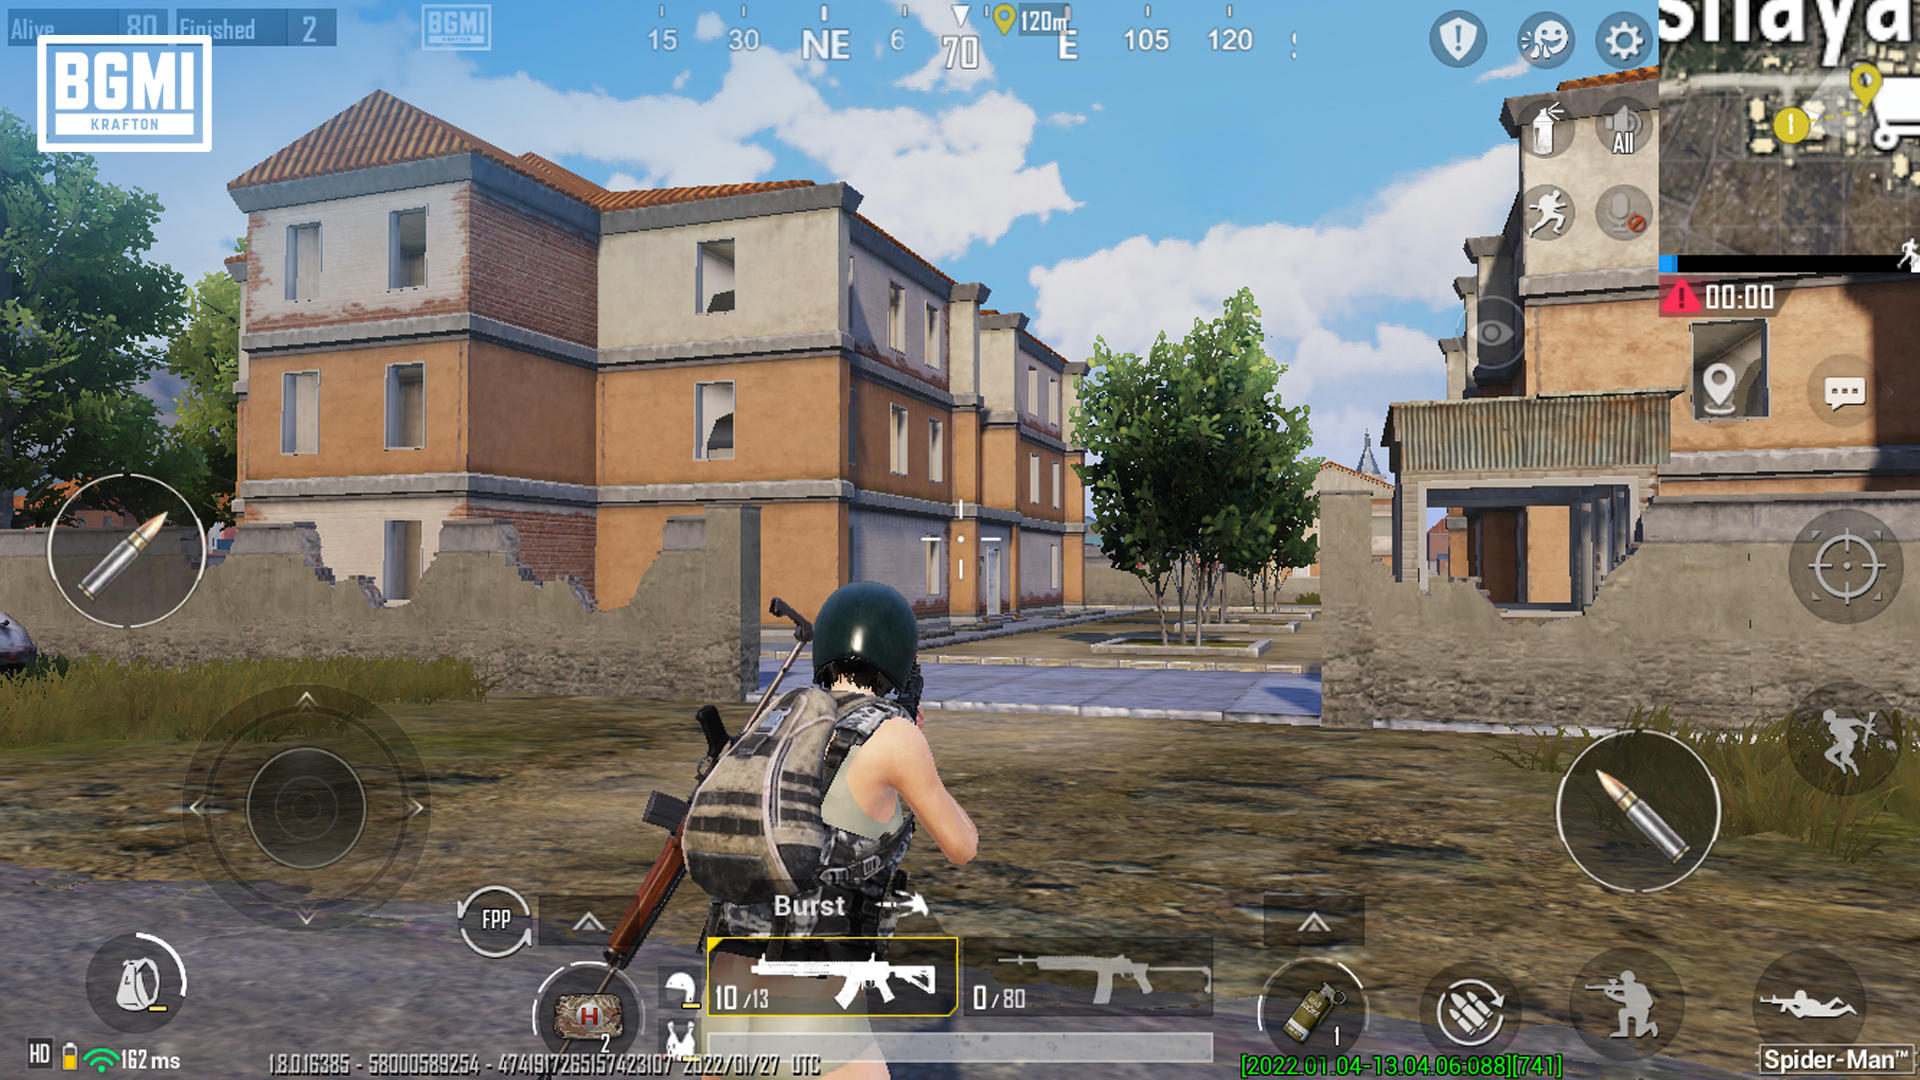 GTA V ANDROID - IOS RELEASE NOW - Battlegrounds Mobile India - PUBG MOBILE  - Fortnite - TapTap